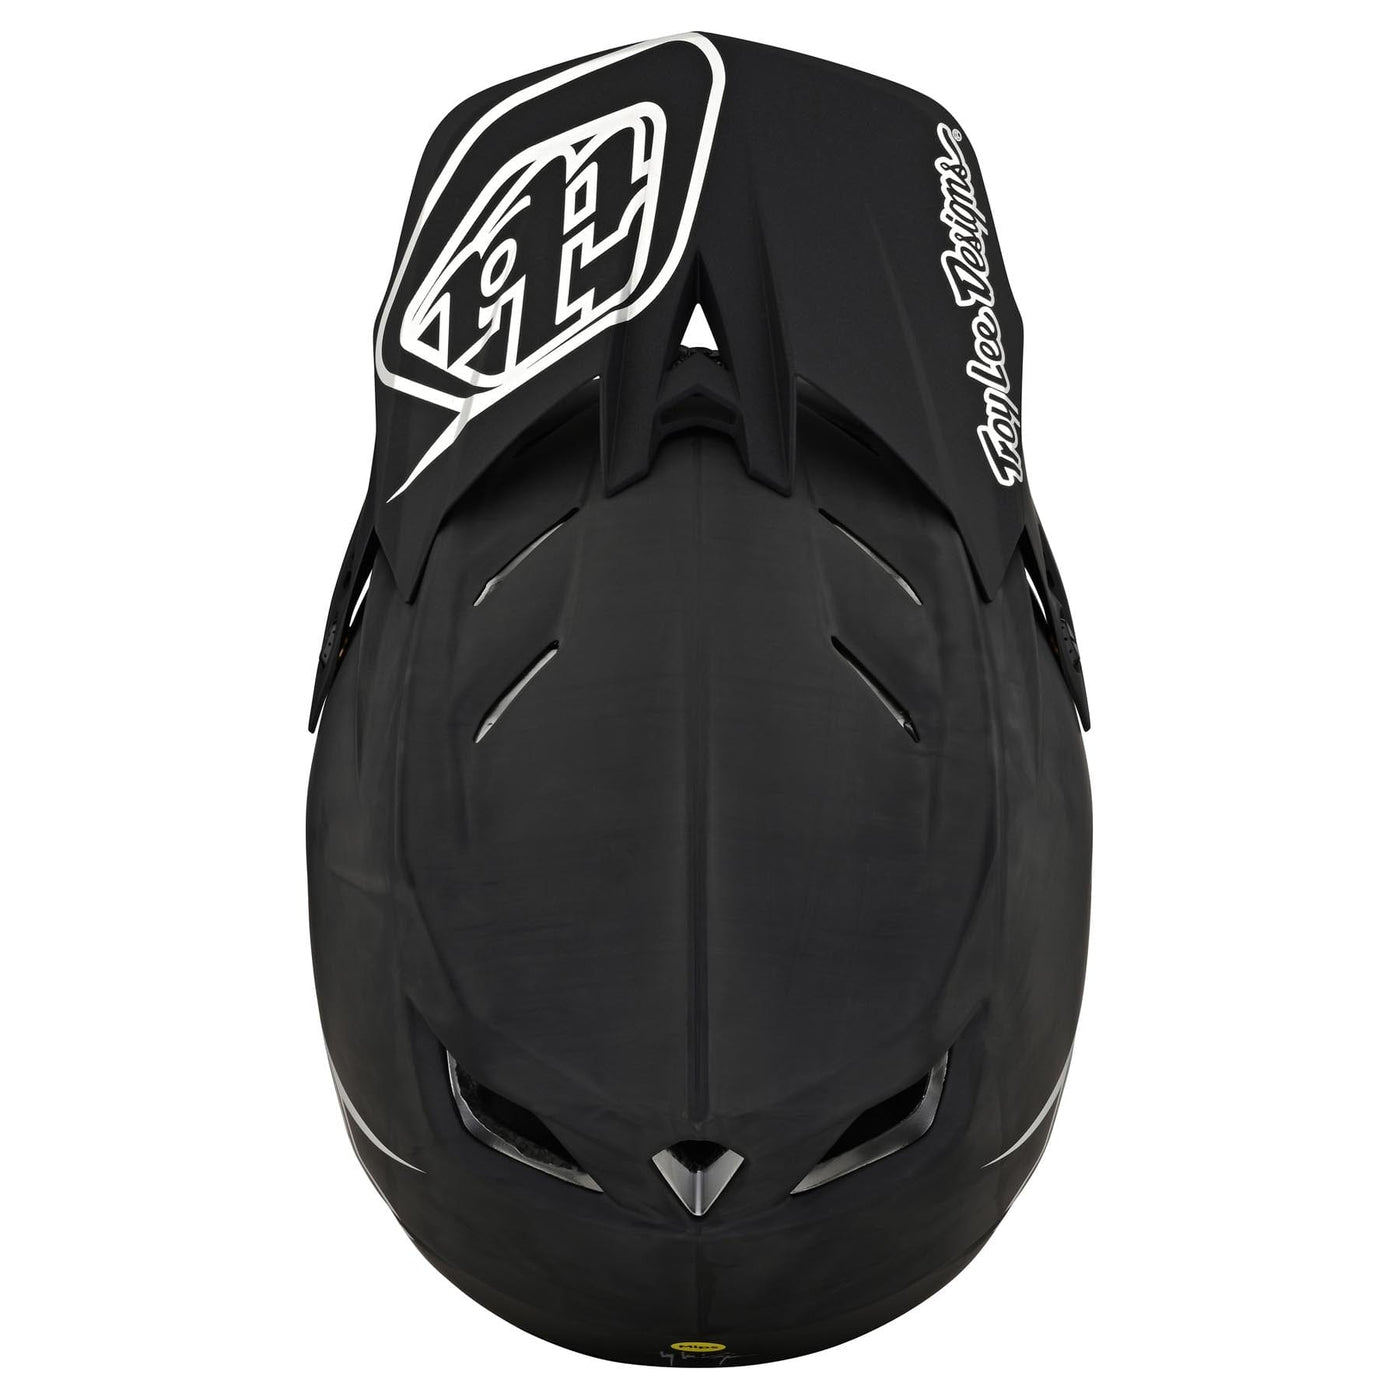 TLD D4 Carbon MIPS Helmet Stealth - Black/Silver 8Lines Shop - Fast Shipping